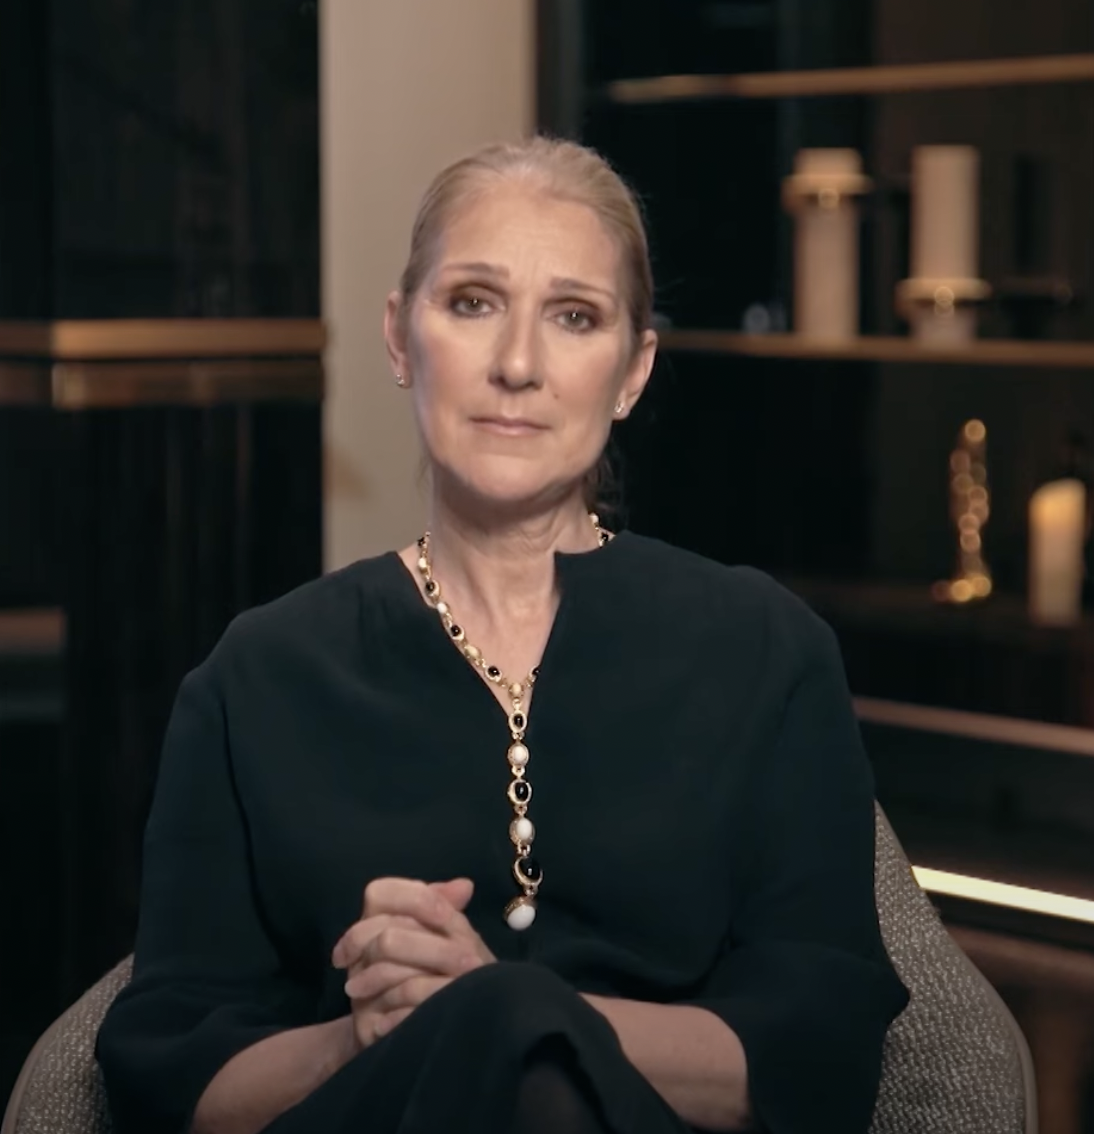 Celine Dion Breaks Down In Tears As She Vows To Keep Fighting Amid Stiff Person Syndrome Battle